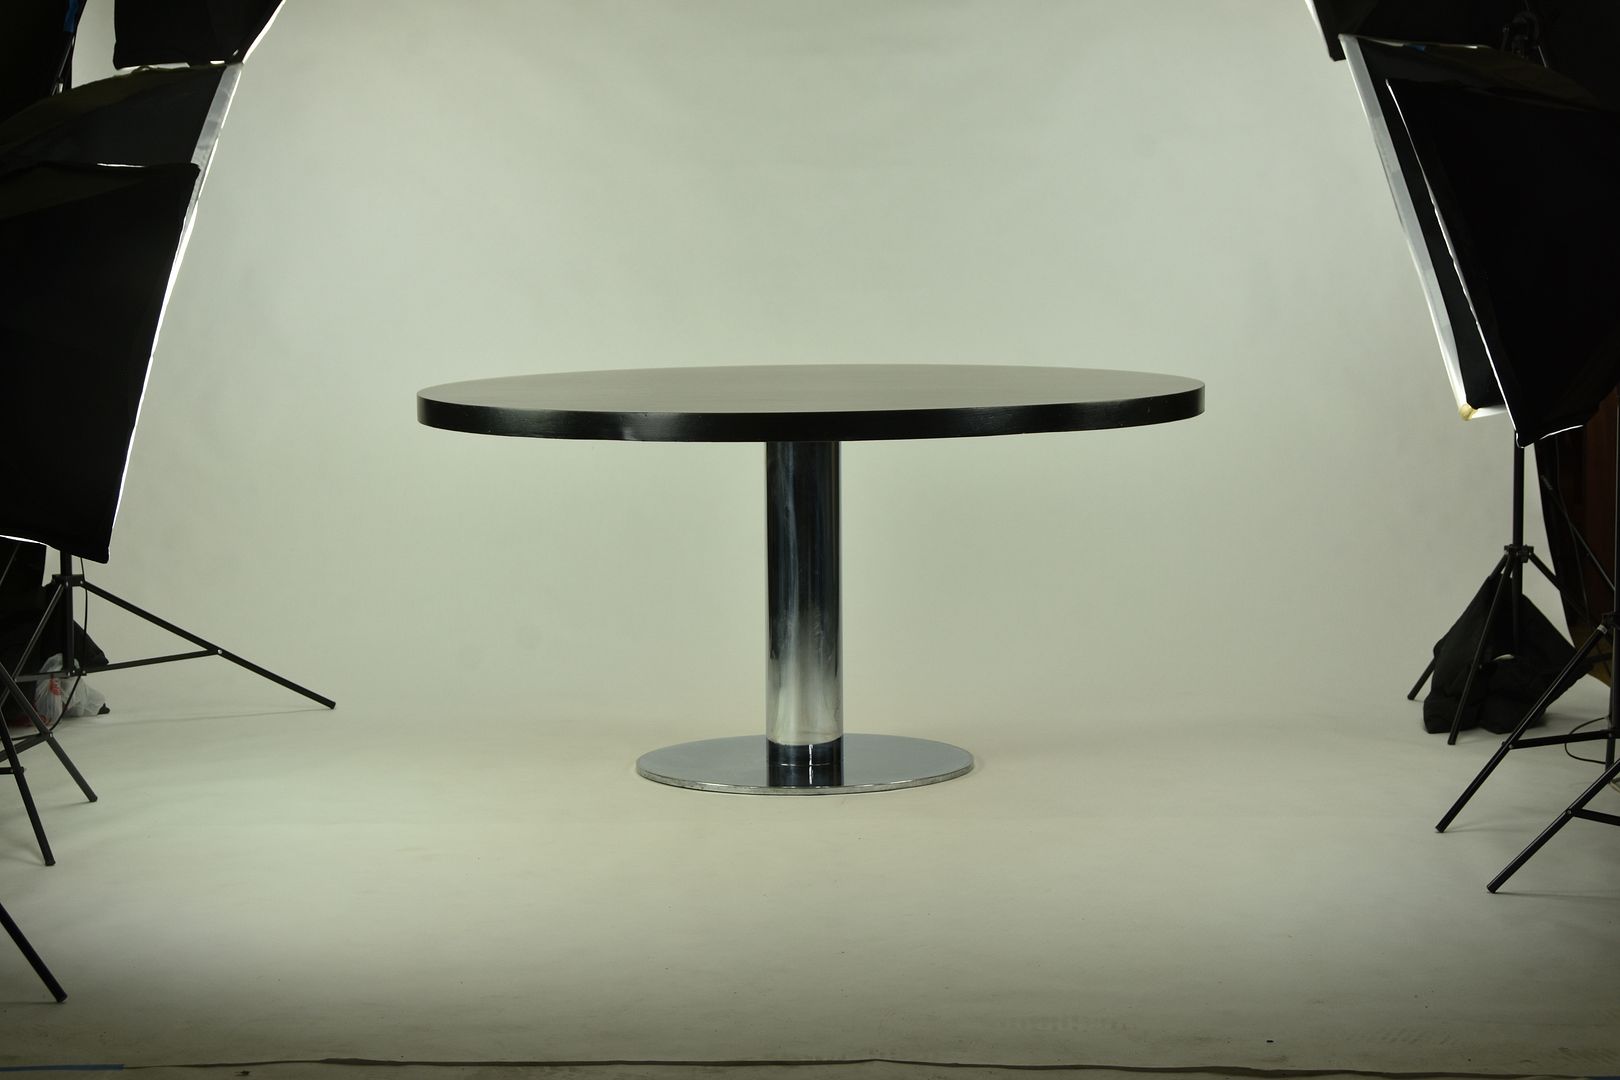 1970s Round Pedestal Conference / Dining Table by Nicos Zographos for Zographos Designs with Ebonized 60 inch Top